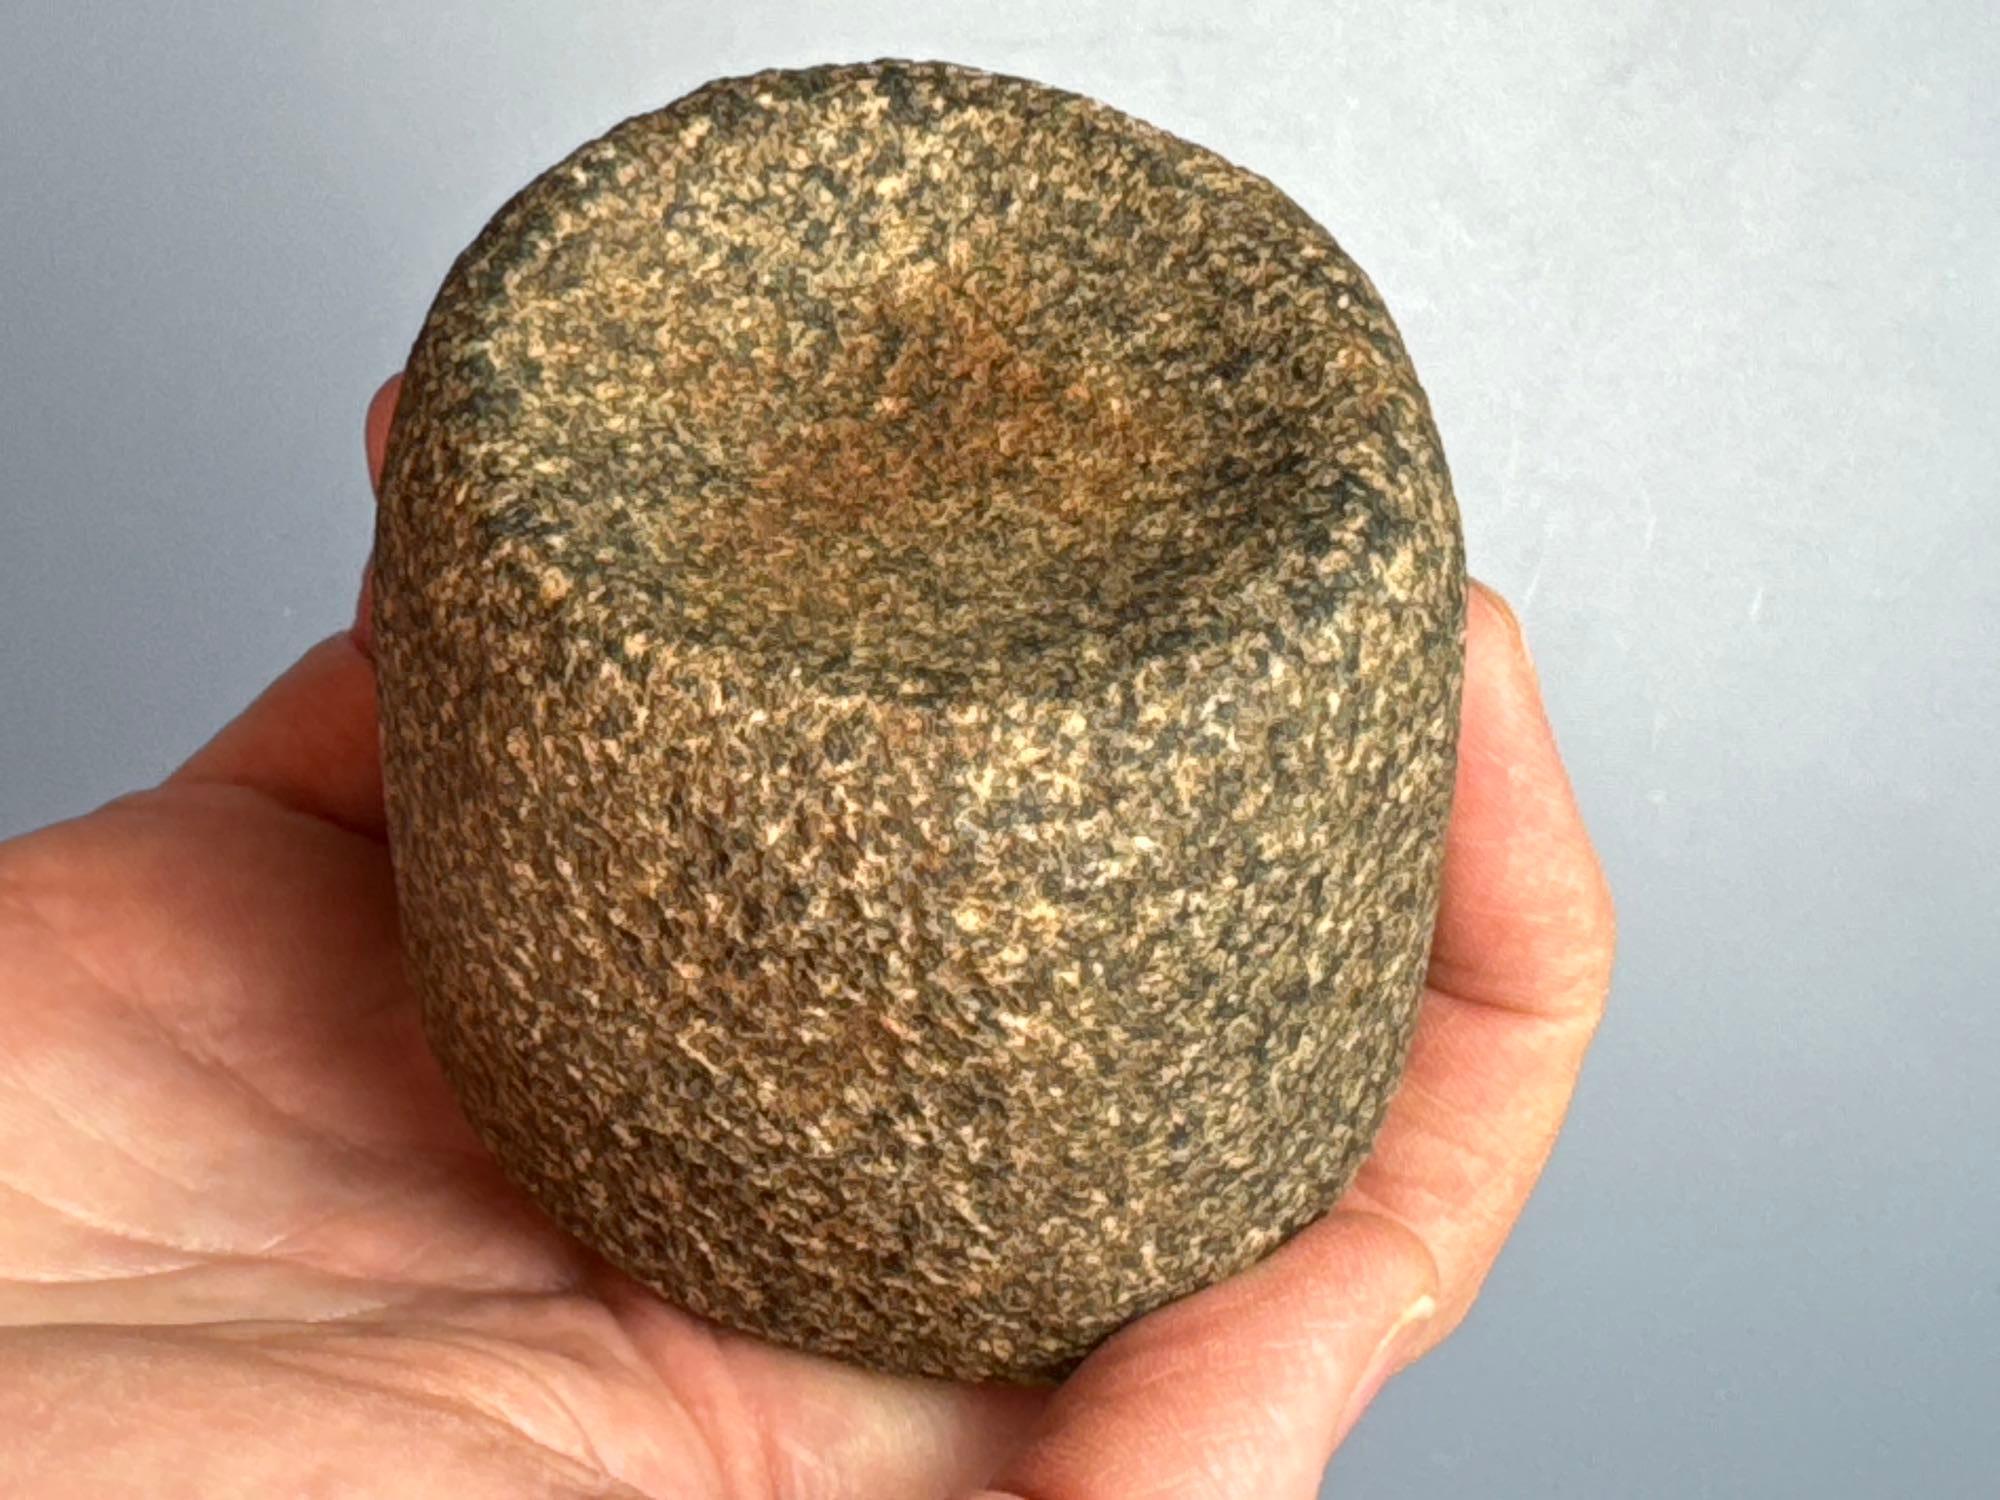 Impressive Barrel Discoidal, Double Cupped, Found in Fulton Co., Illinois near Lewistown, Purchased